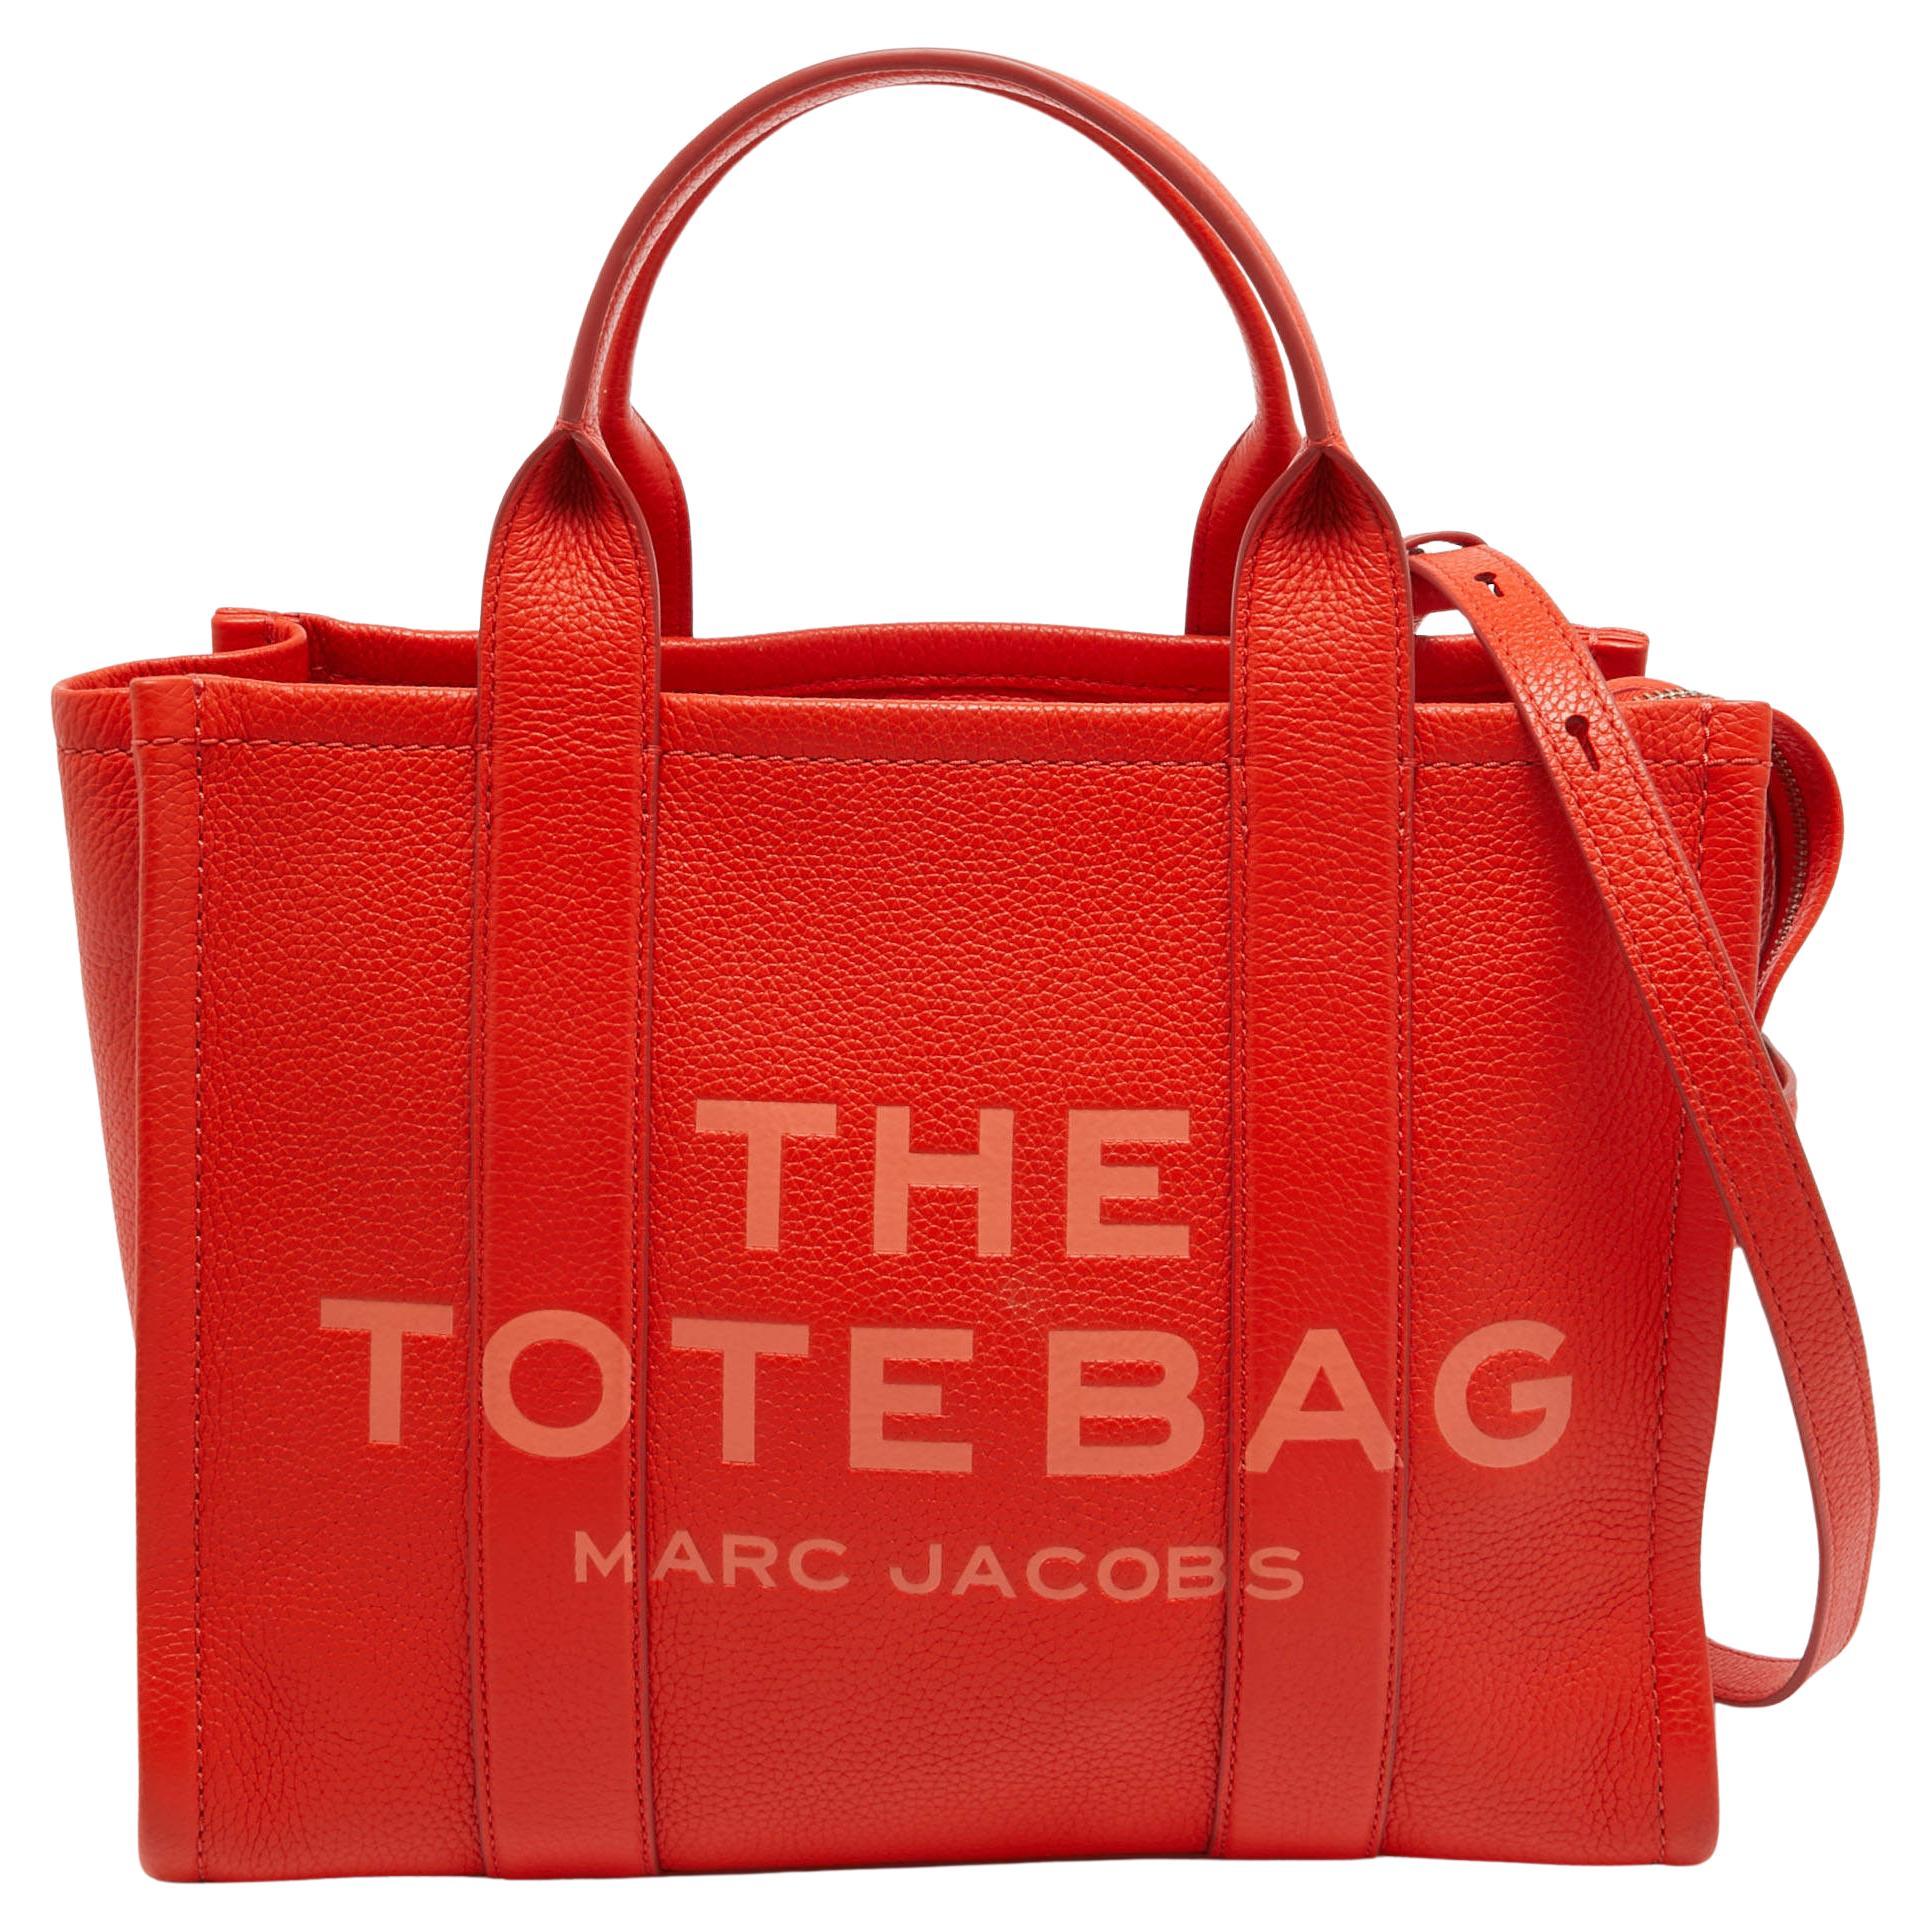 Marc Jacobs Orange Leather Medium The Tote Bag For Sale